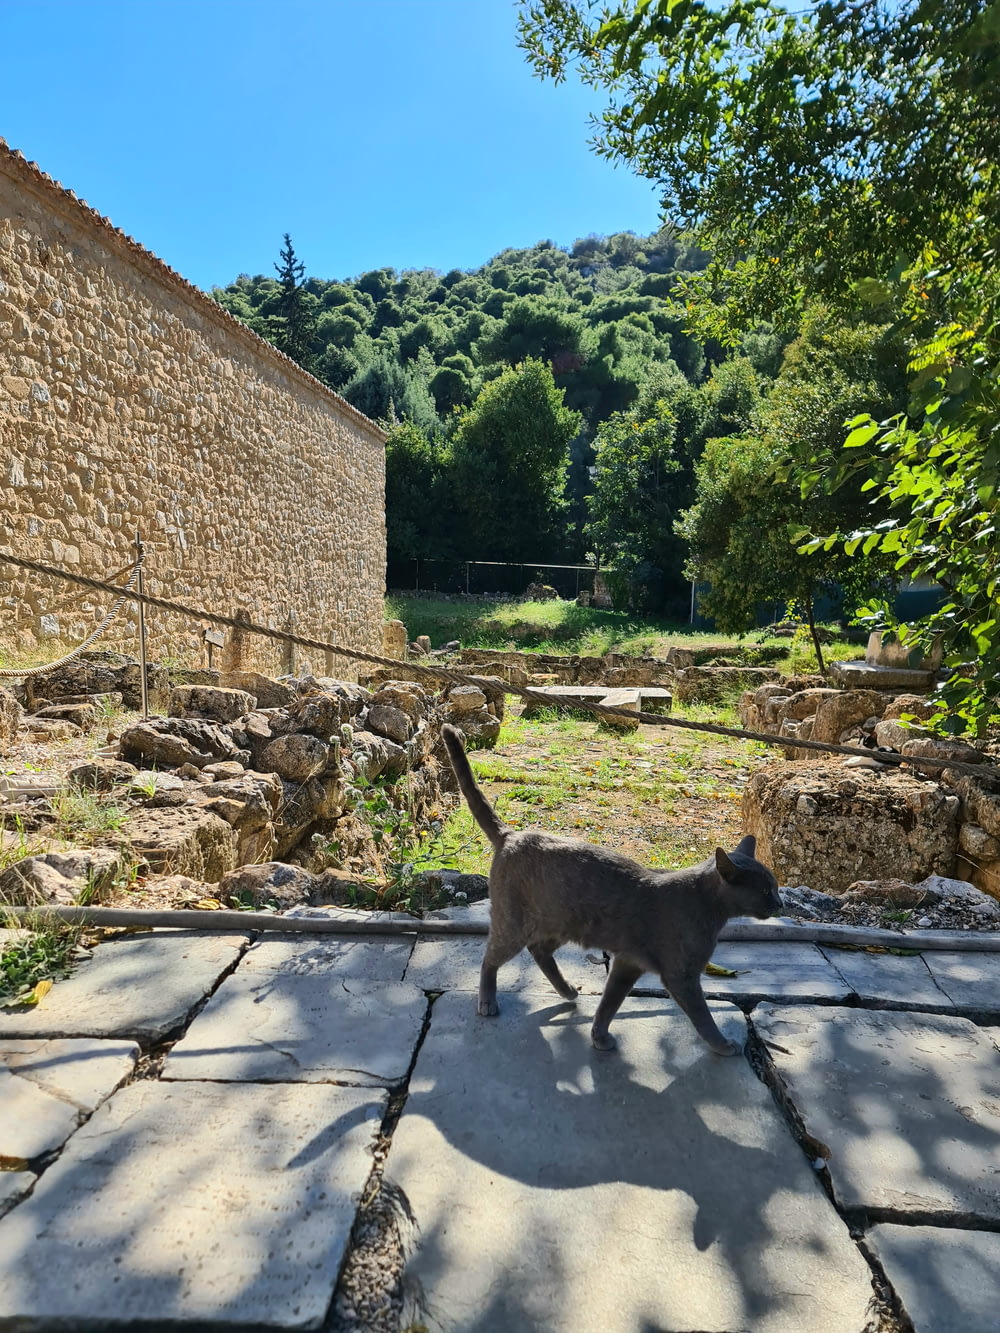 a cat walking across a stone walkway next to a stone wall